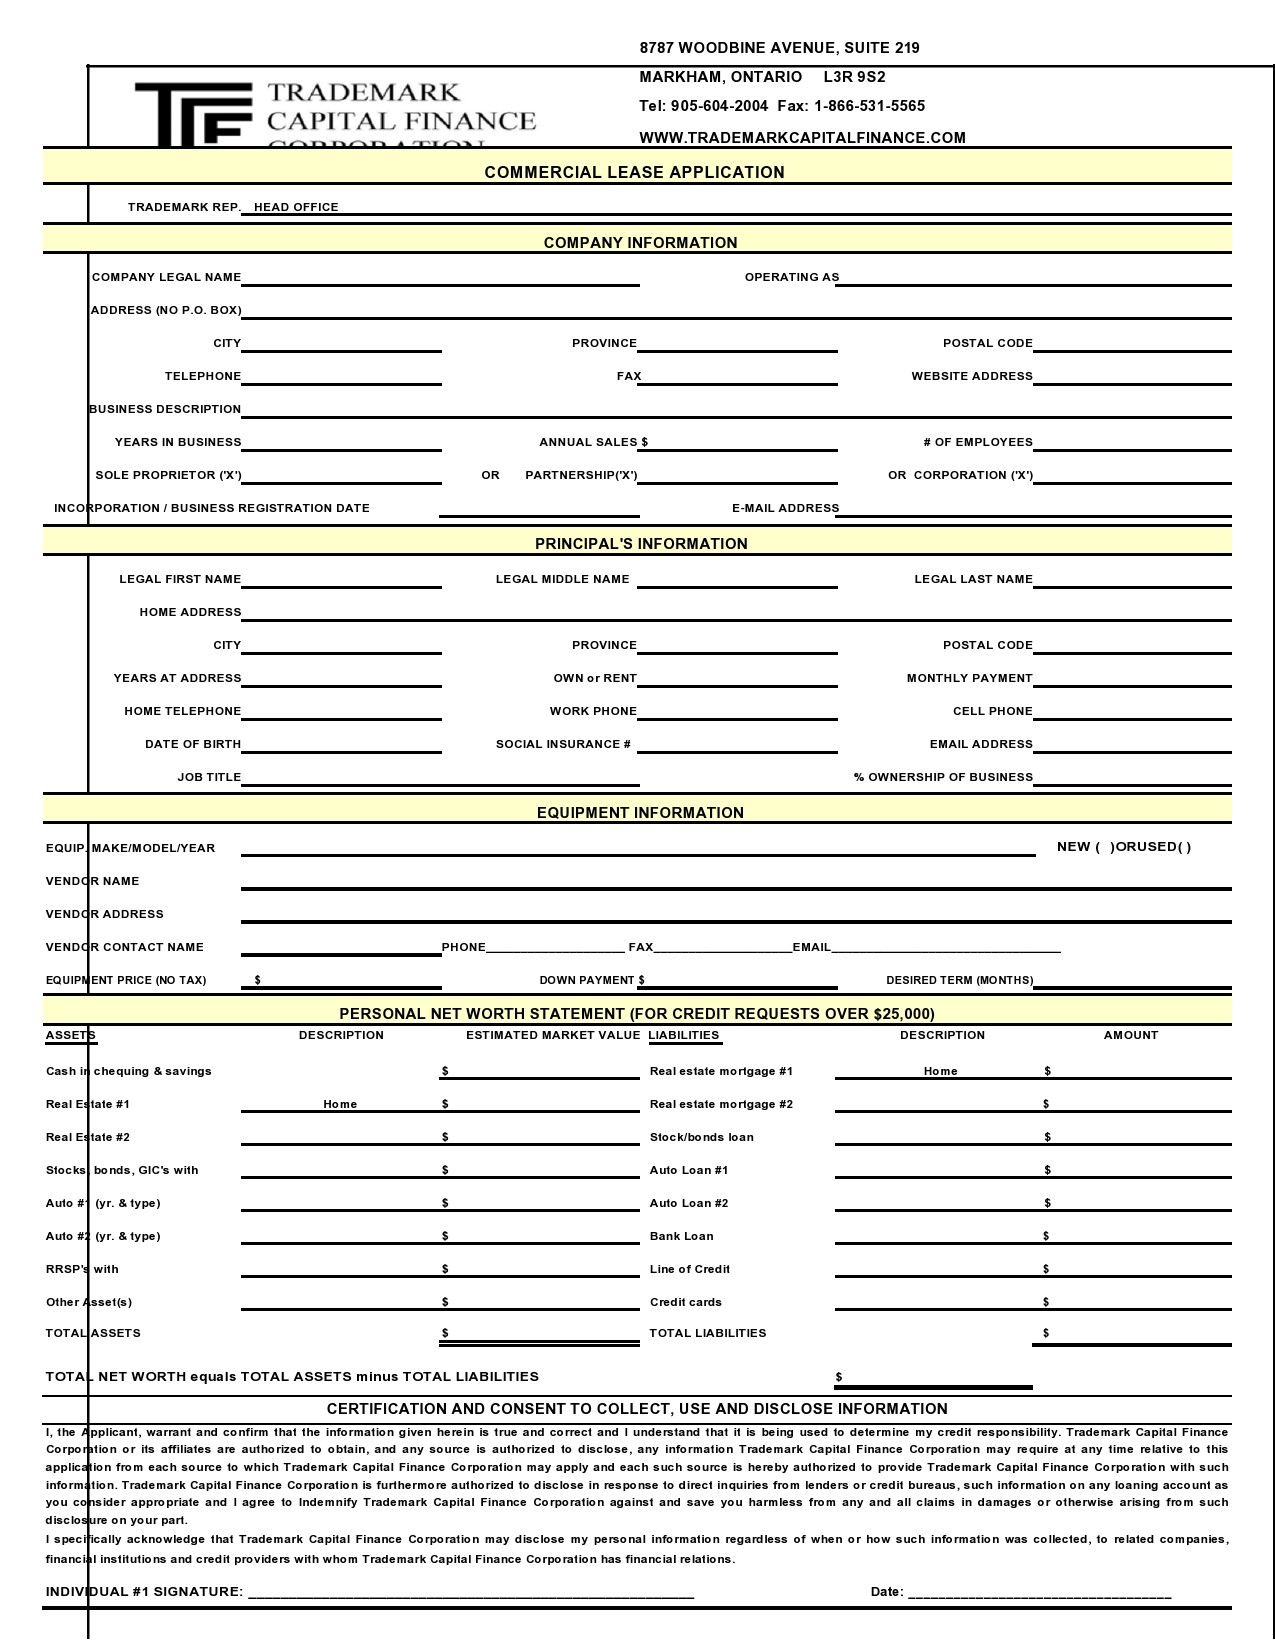 Free commercial lease application 34